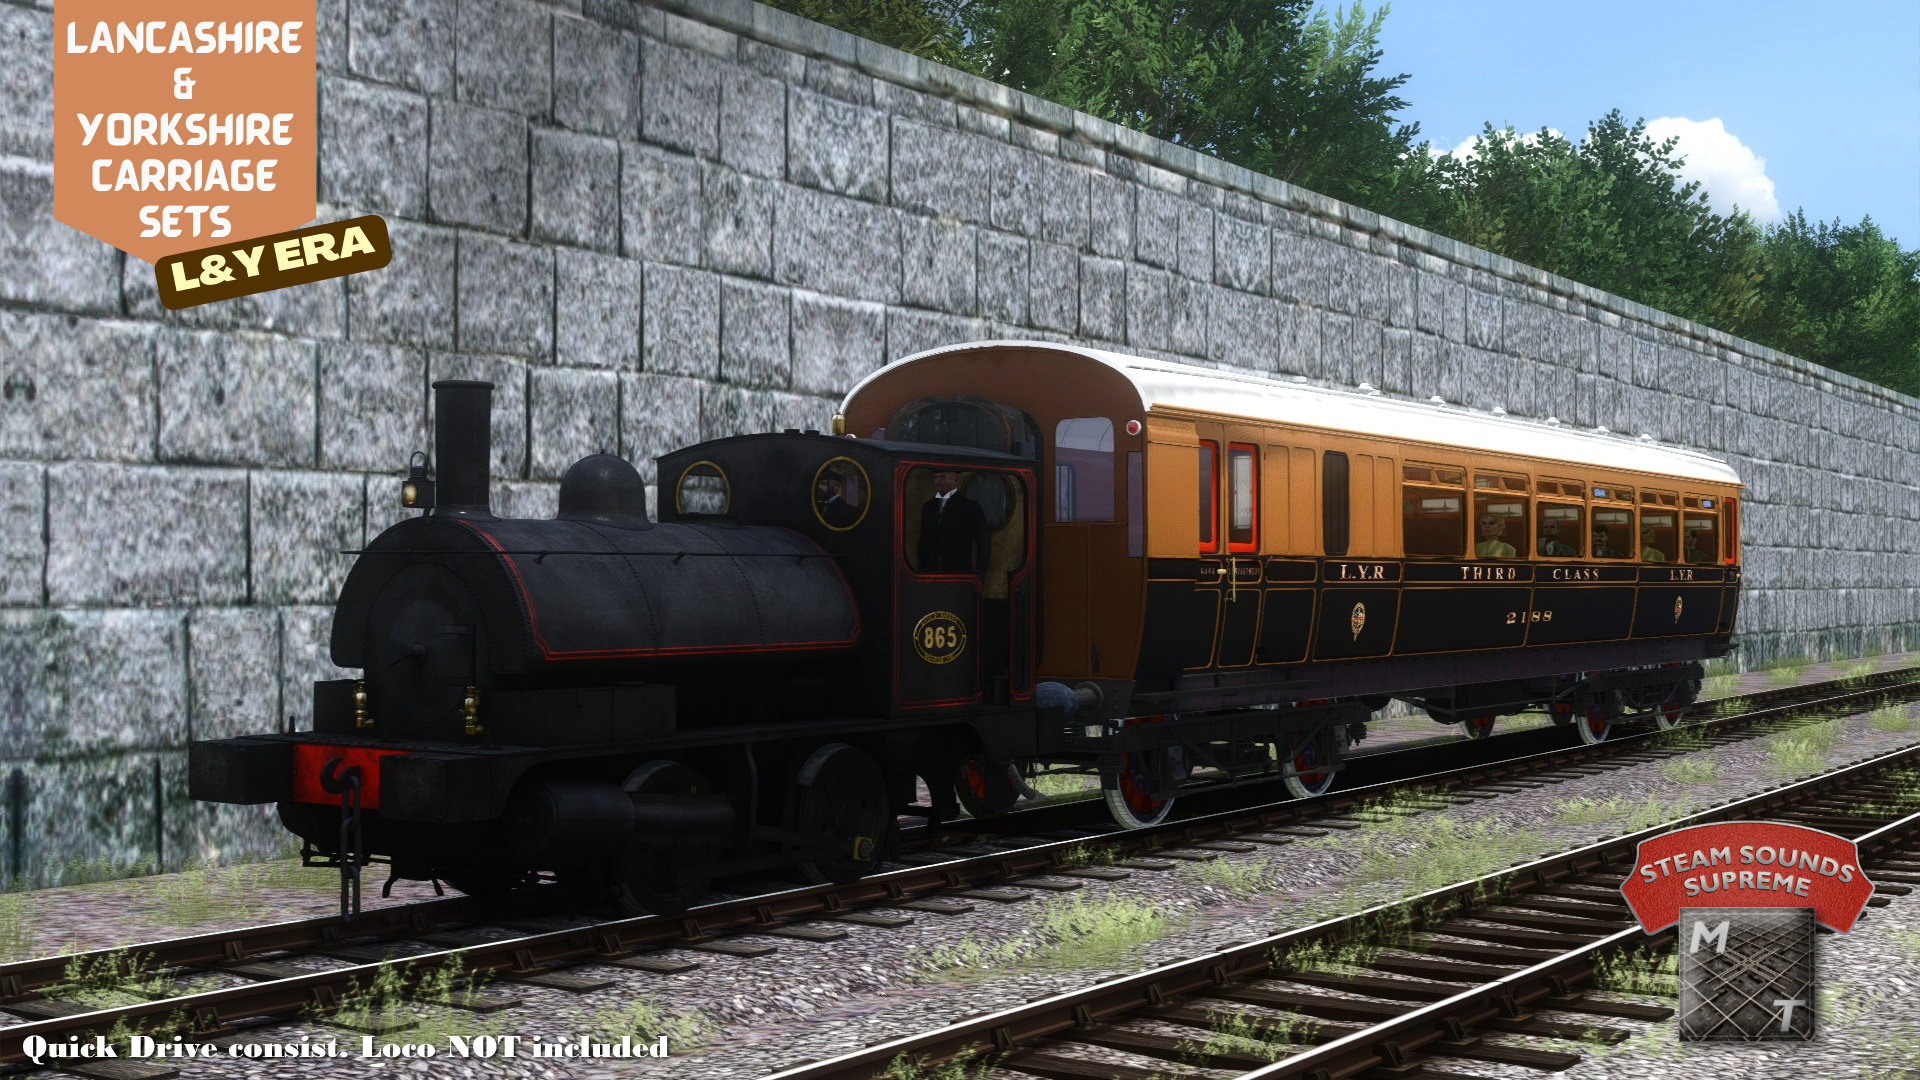 L&Y CARRIAGE SETS 17.png